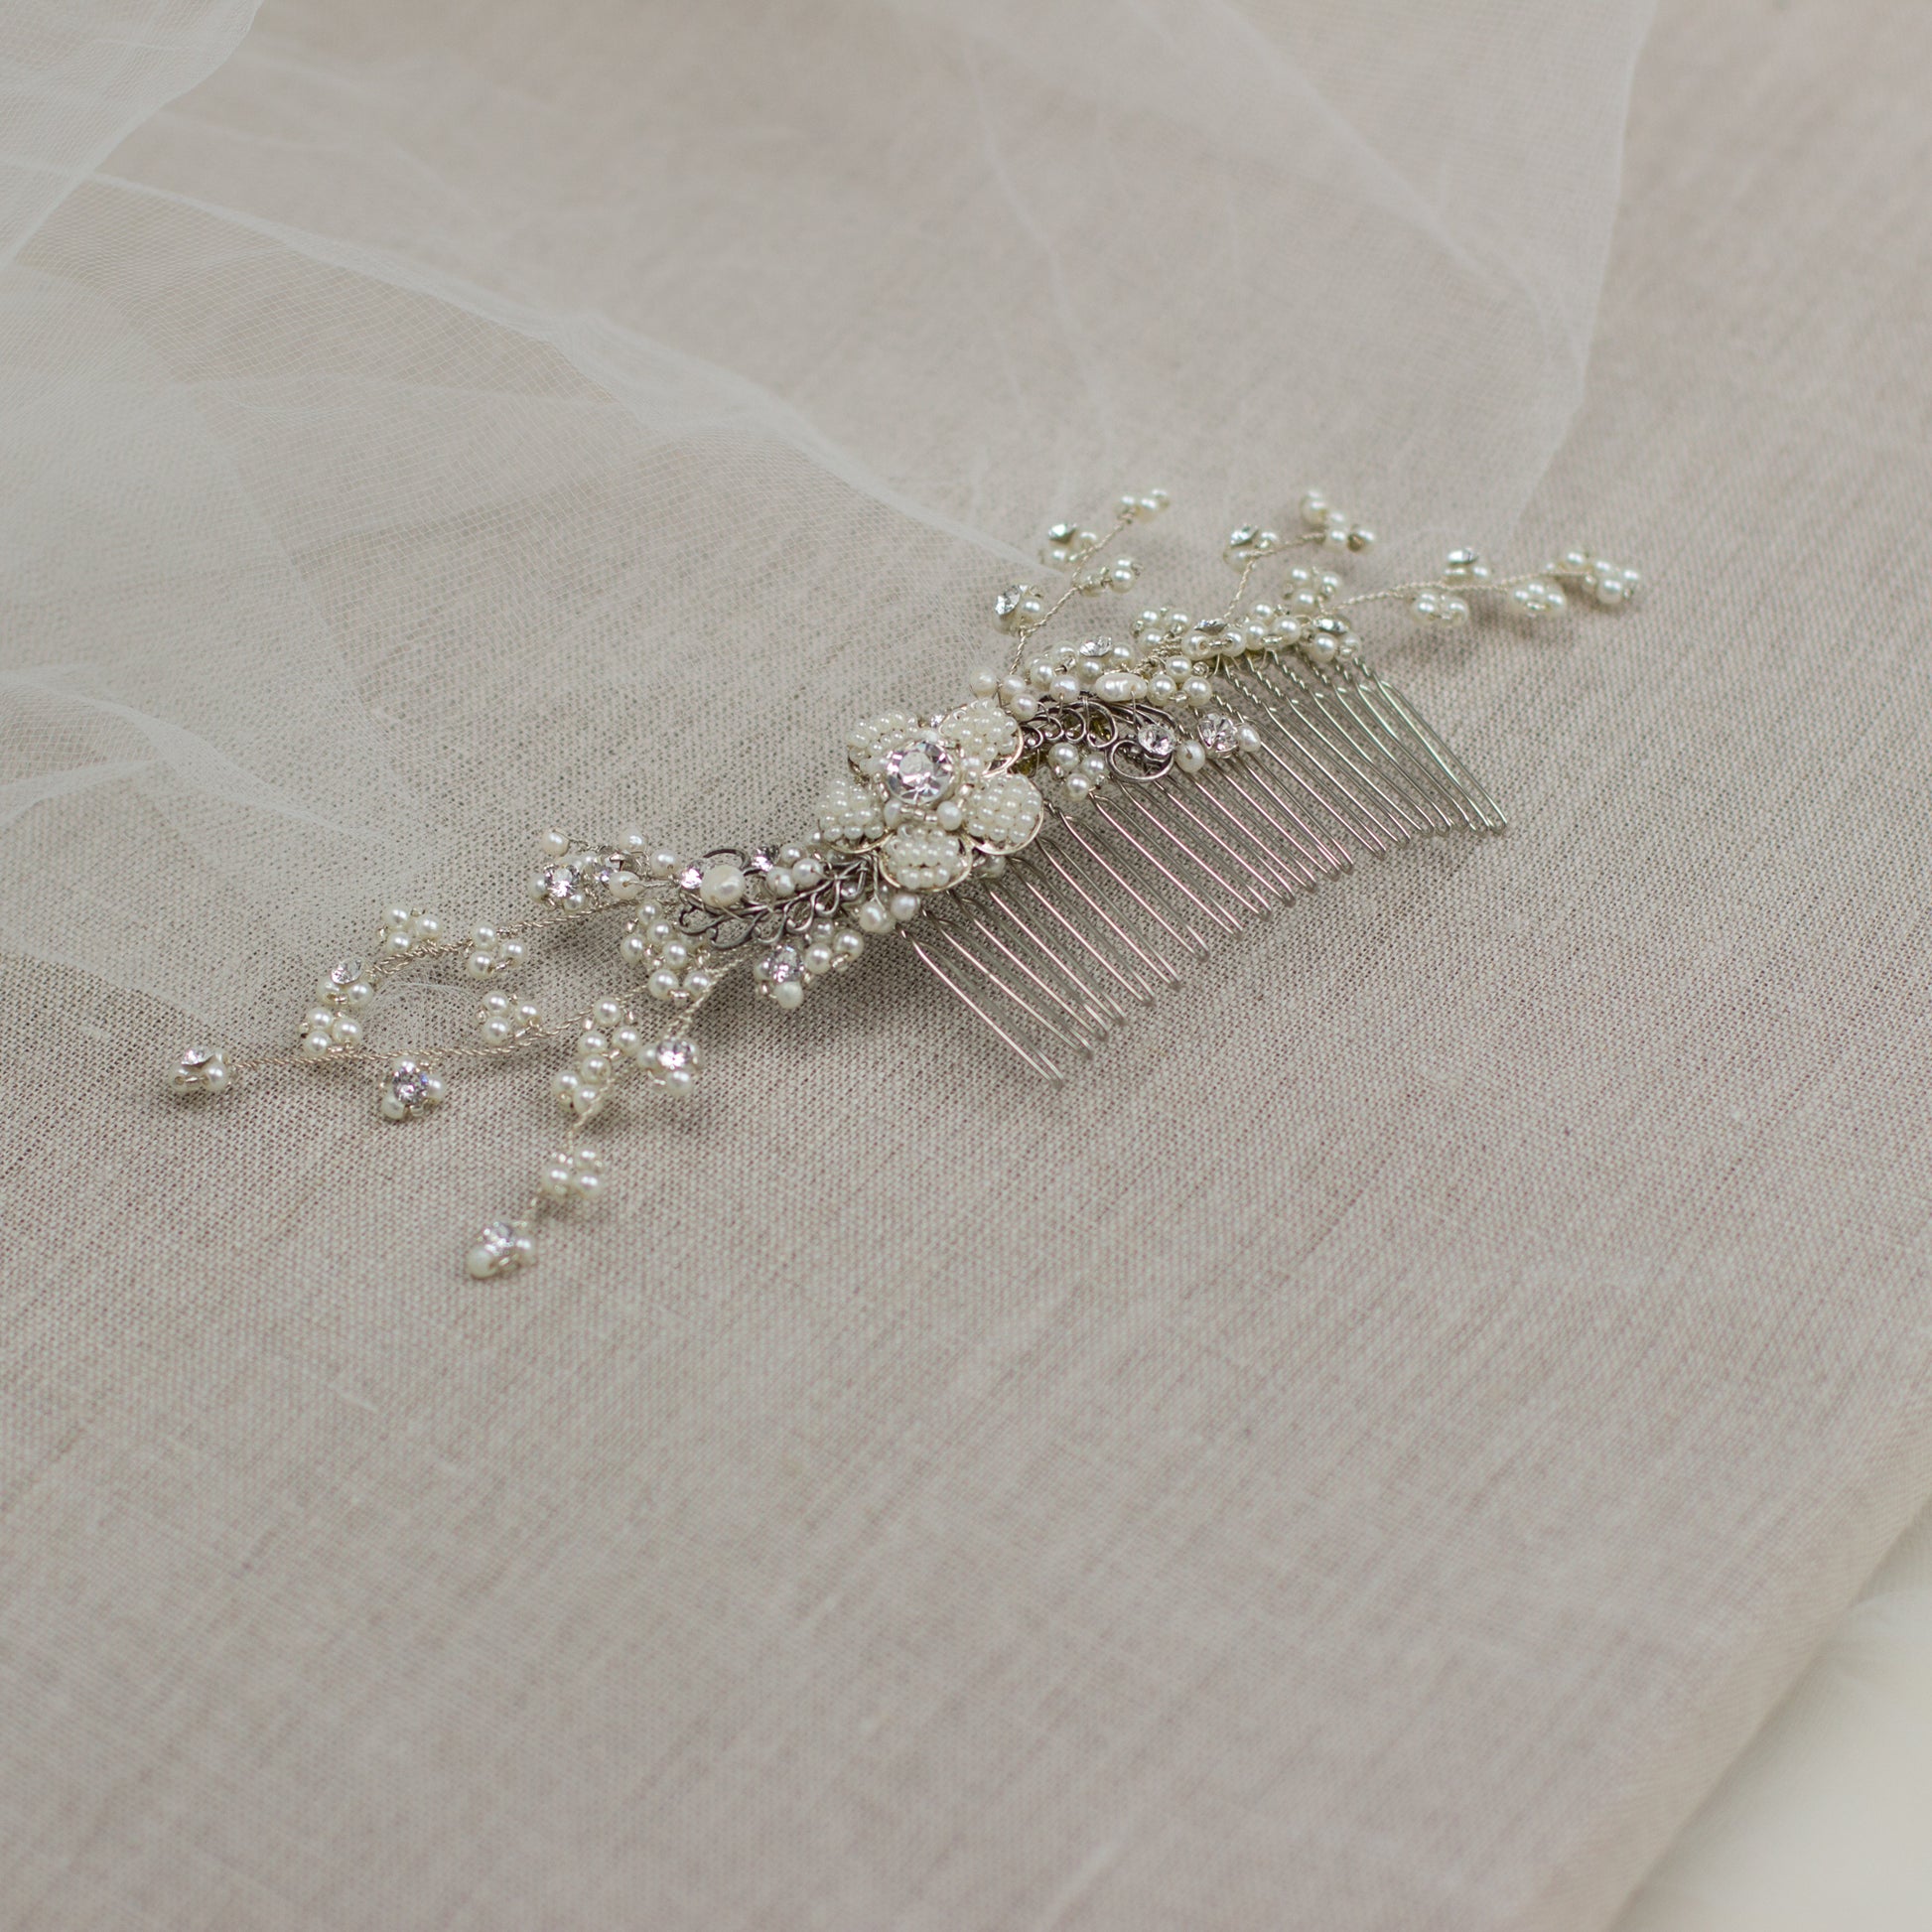 Explore unique handmade bridal hair accessories at our online boutique in Europe. This beautiful one of a kind pearl hair comb, bridal hair adornment, crystal wedding headpiece features floral motifs, pearl twigs decorated with crystals. Perfect for your special day. 